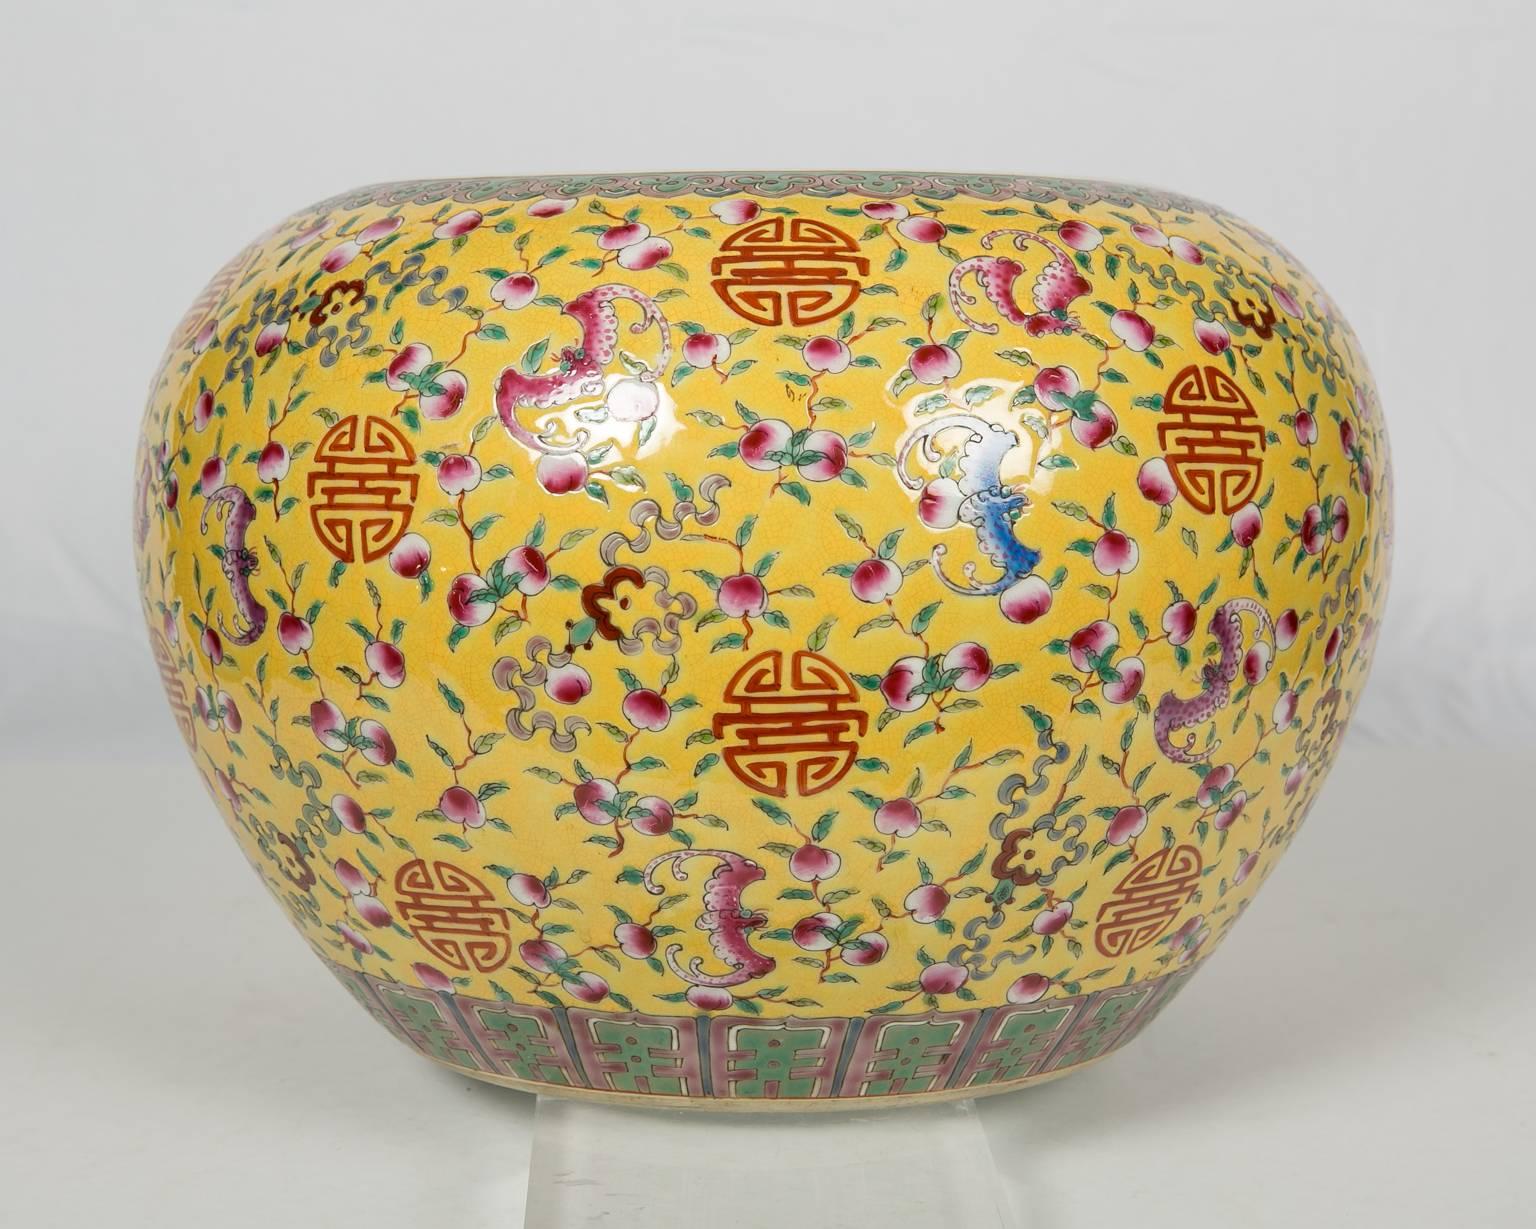 The famille rose (fencai) fish bowl is richly colored with a bright yellow background, upon which are vividly depicted traditional symbols of blessings and longevity, such as bats and peaches. The good wishes for longevity are further conveyed to